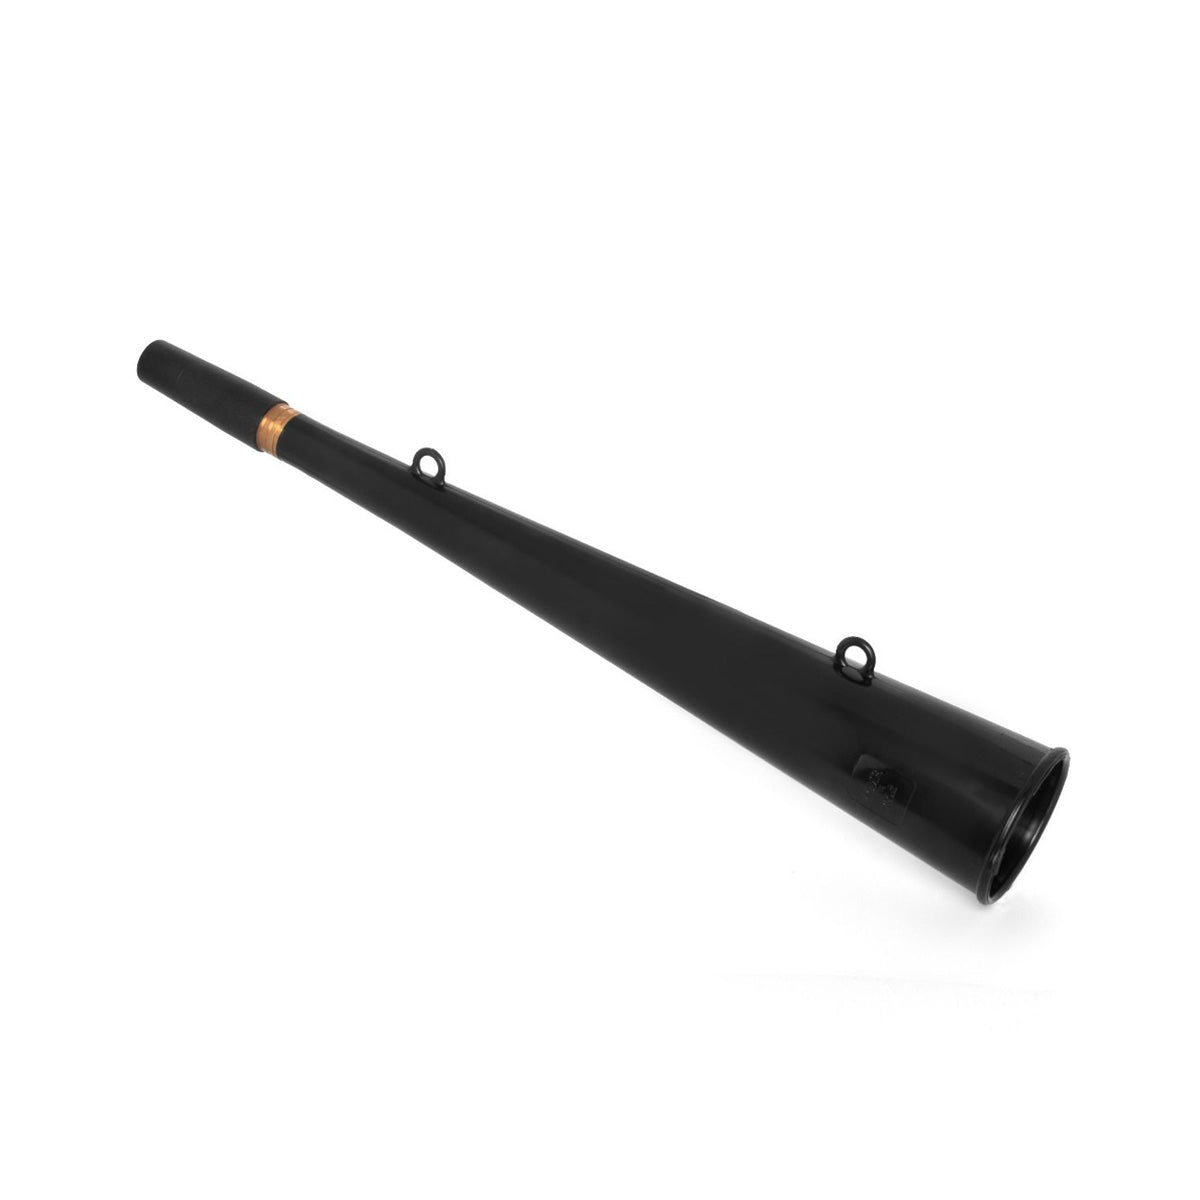 Acme Signal horn with standard mouthpiece - black plastic